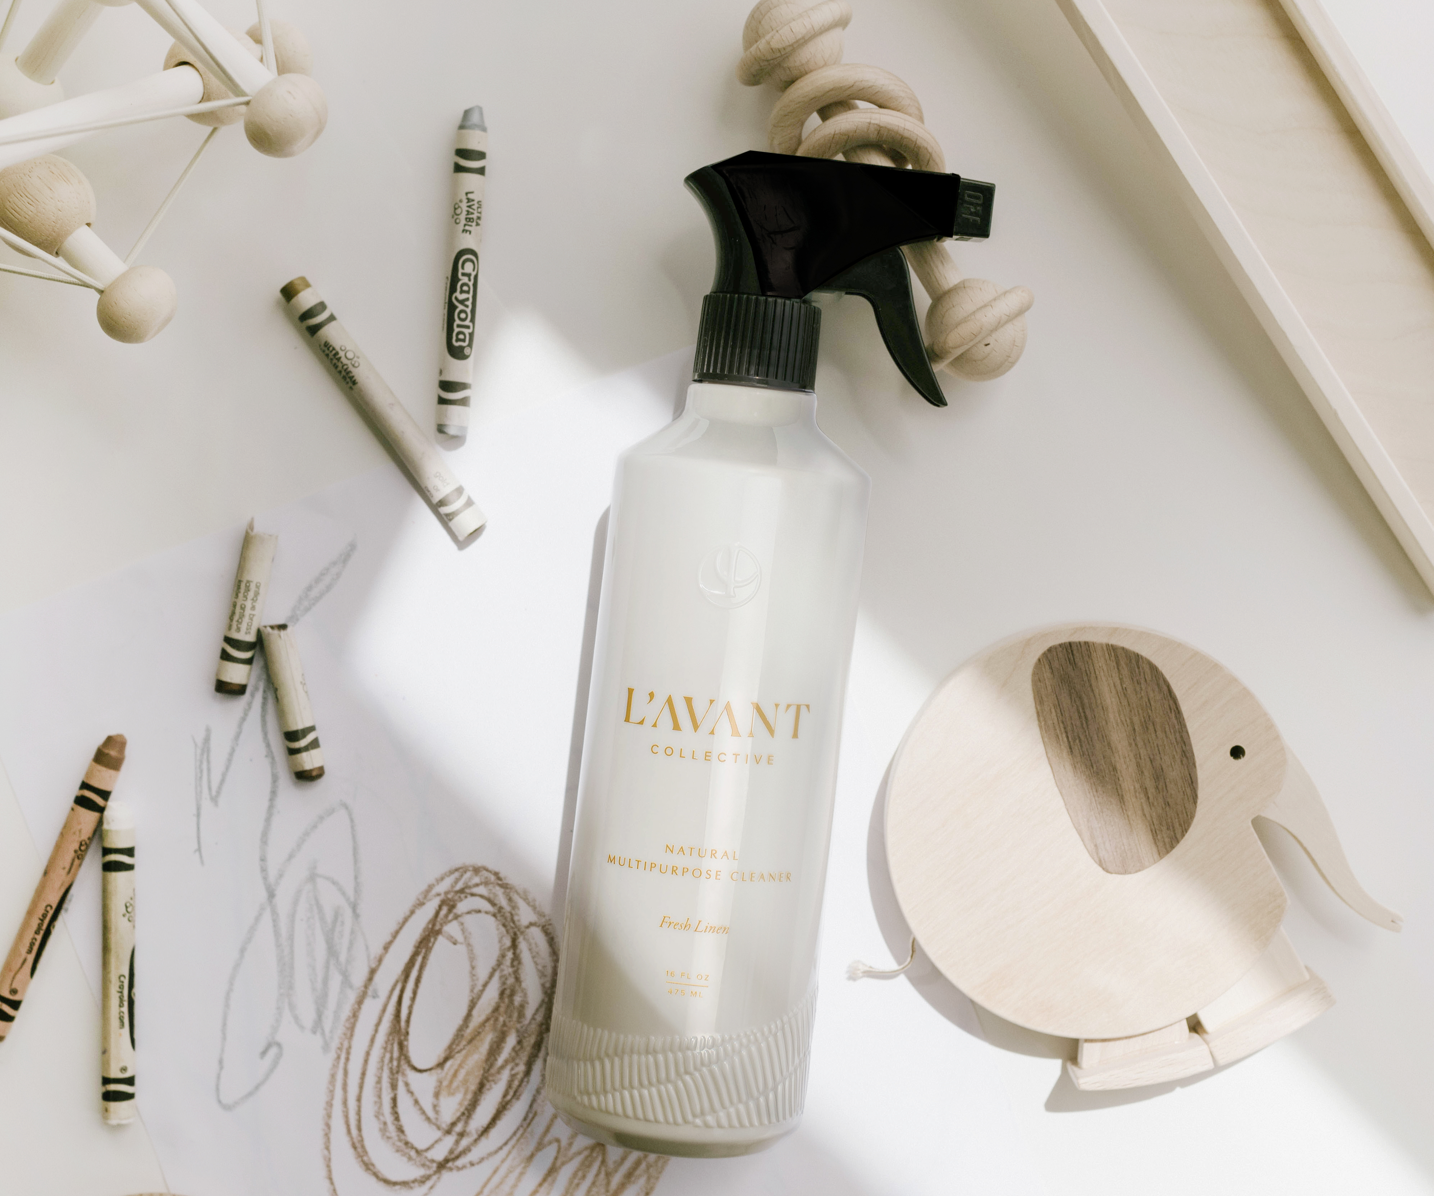 Plant-Based Multipurpose Surface Cleaner. Plant-Based Cleaning Spray. –  L'AVANT Collective